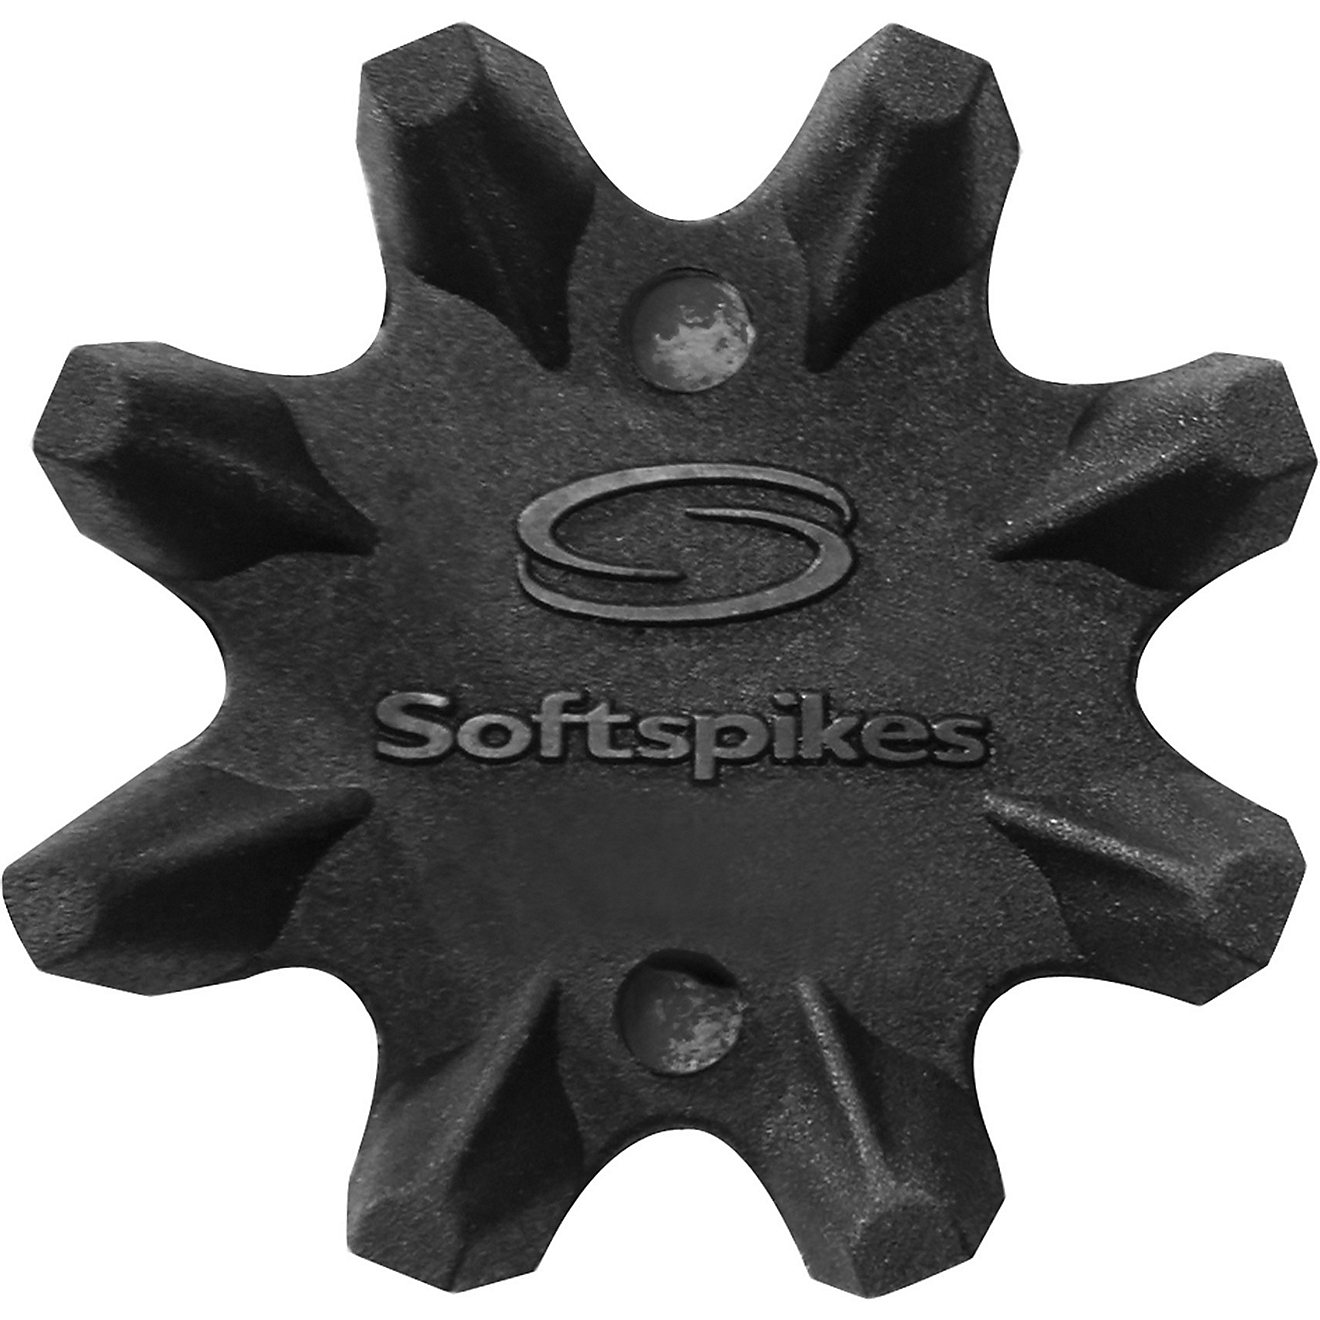 Softspikes Black Widow Fast-Twist Golf Shoe Spikes 16-Pack                                                                       - view number 2